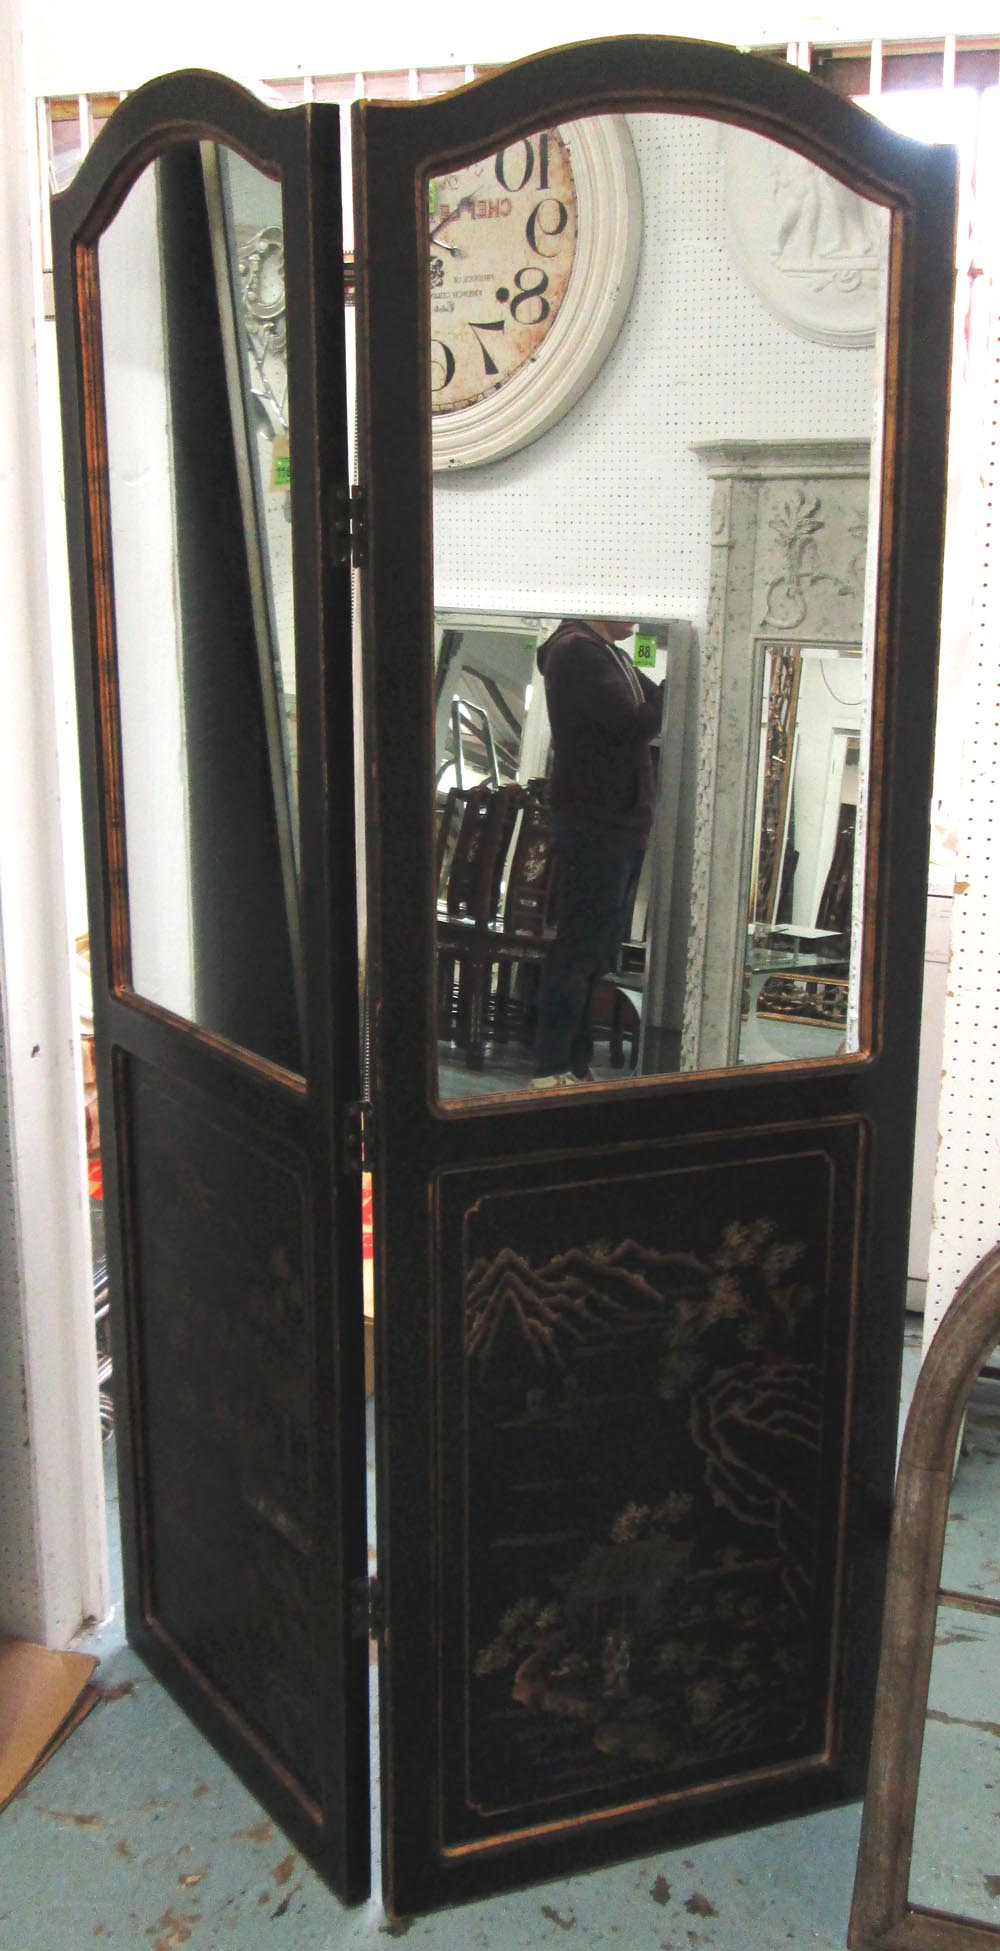 MIRRORED TWO FOLD SCREEN, in black lacquer chinoiserie style with gold painted trim, 120cm (60cm x